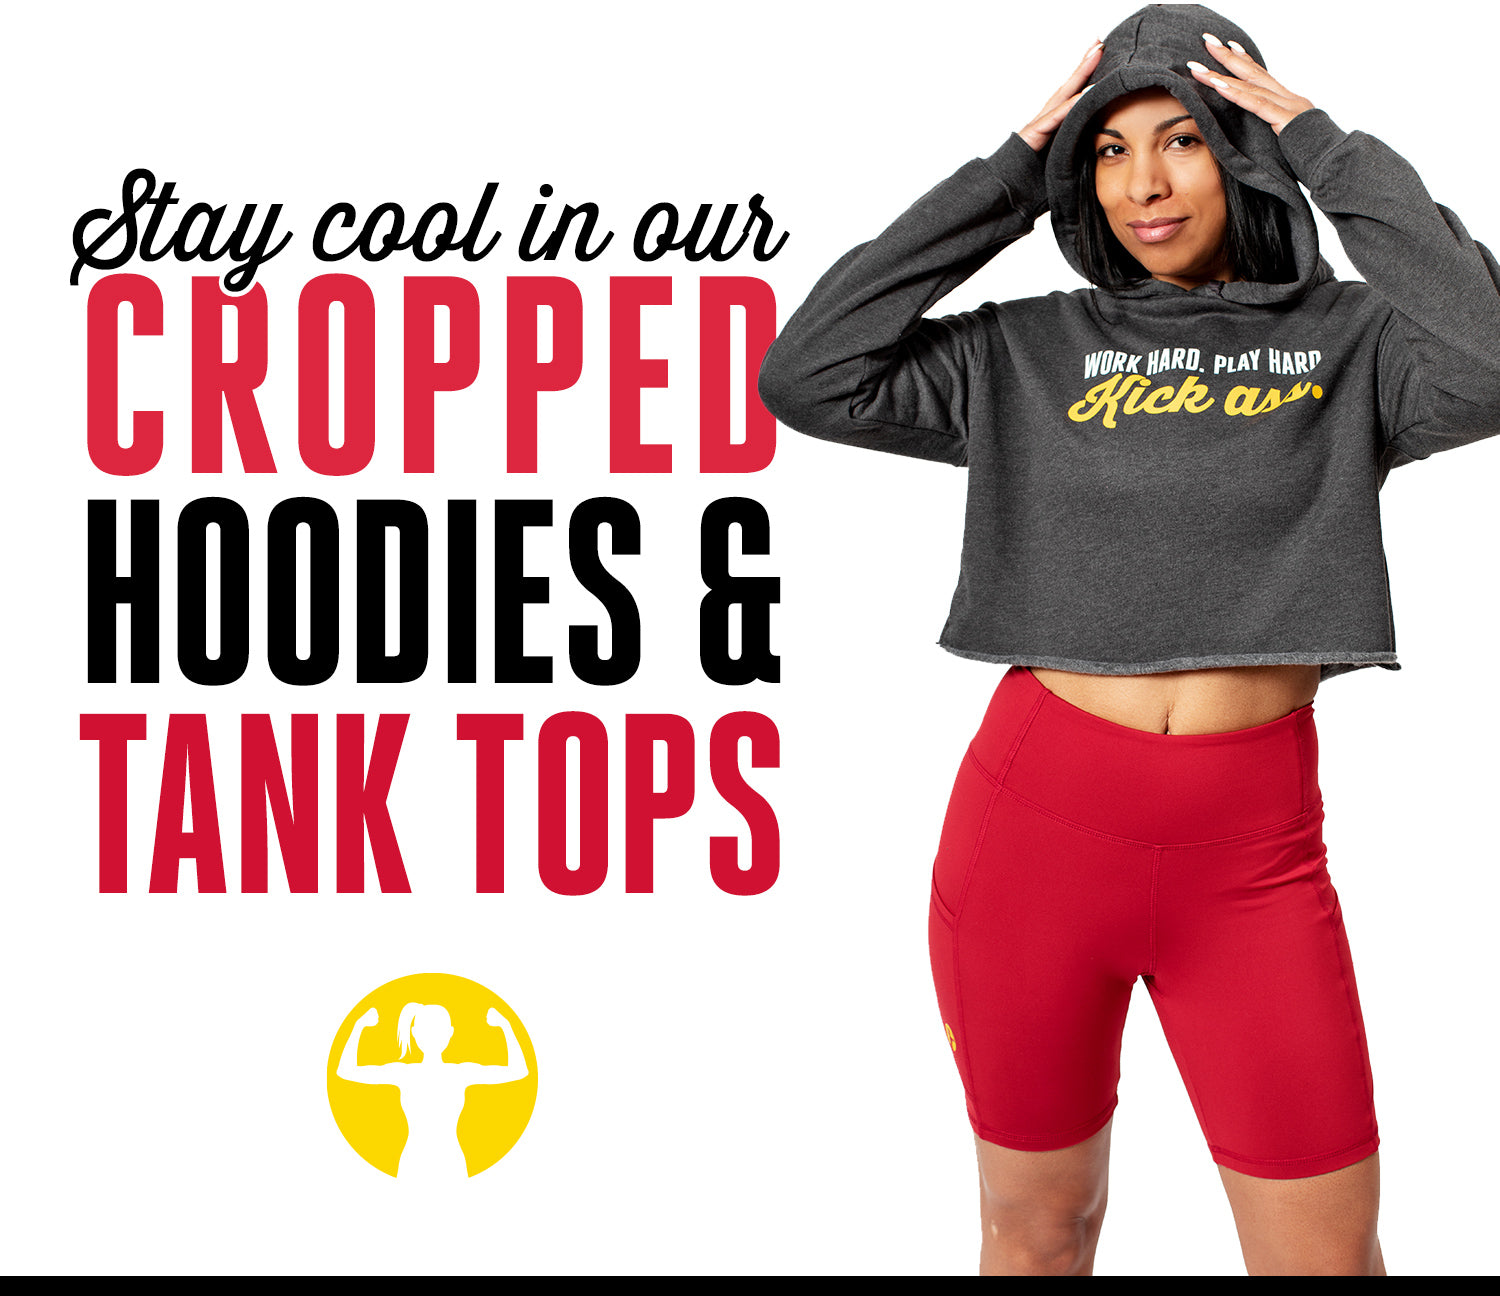 Cropped Hoodies & Tank Tops with Sayings